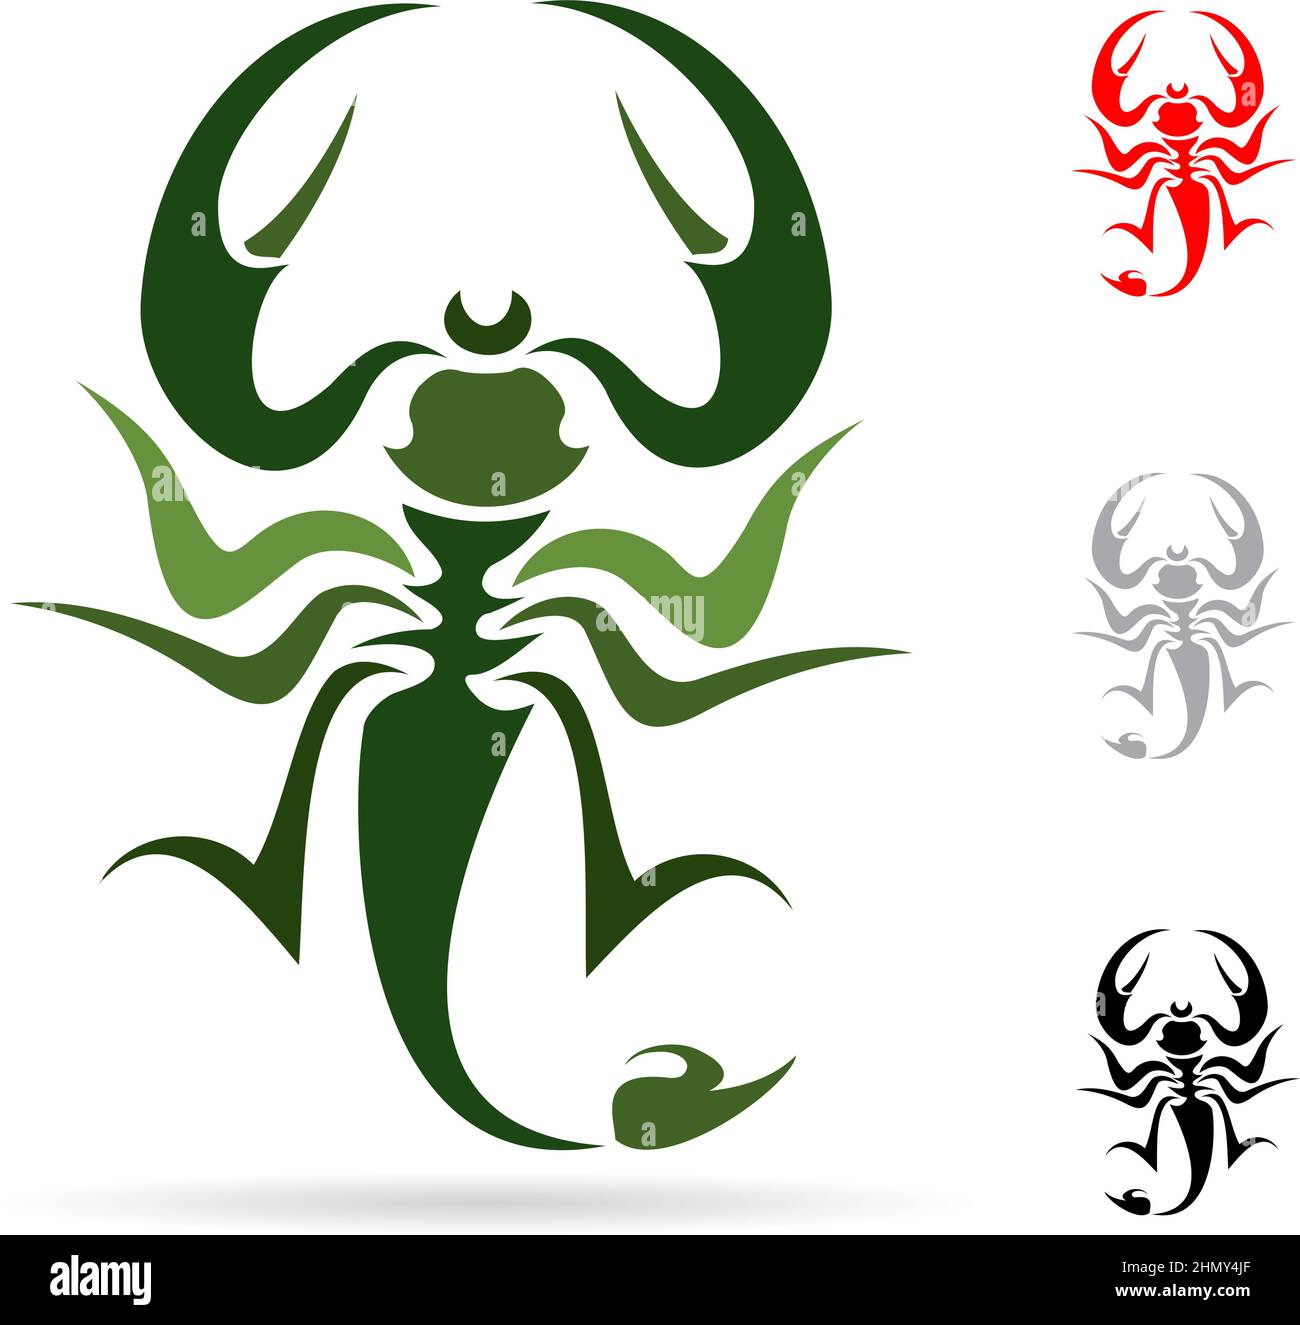 How to draw a scorpion tribal tattoo - YouTube